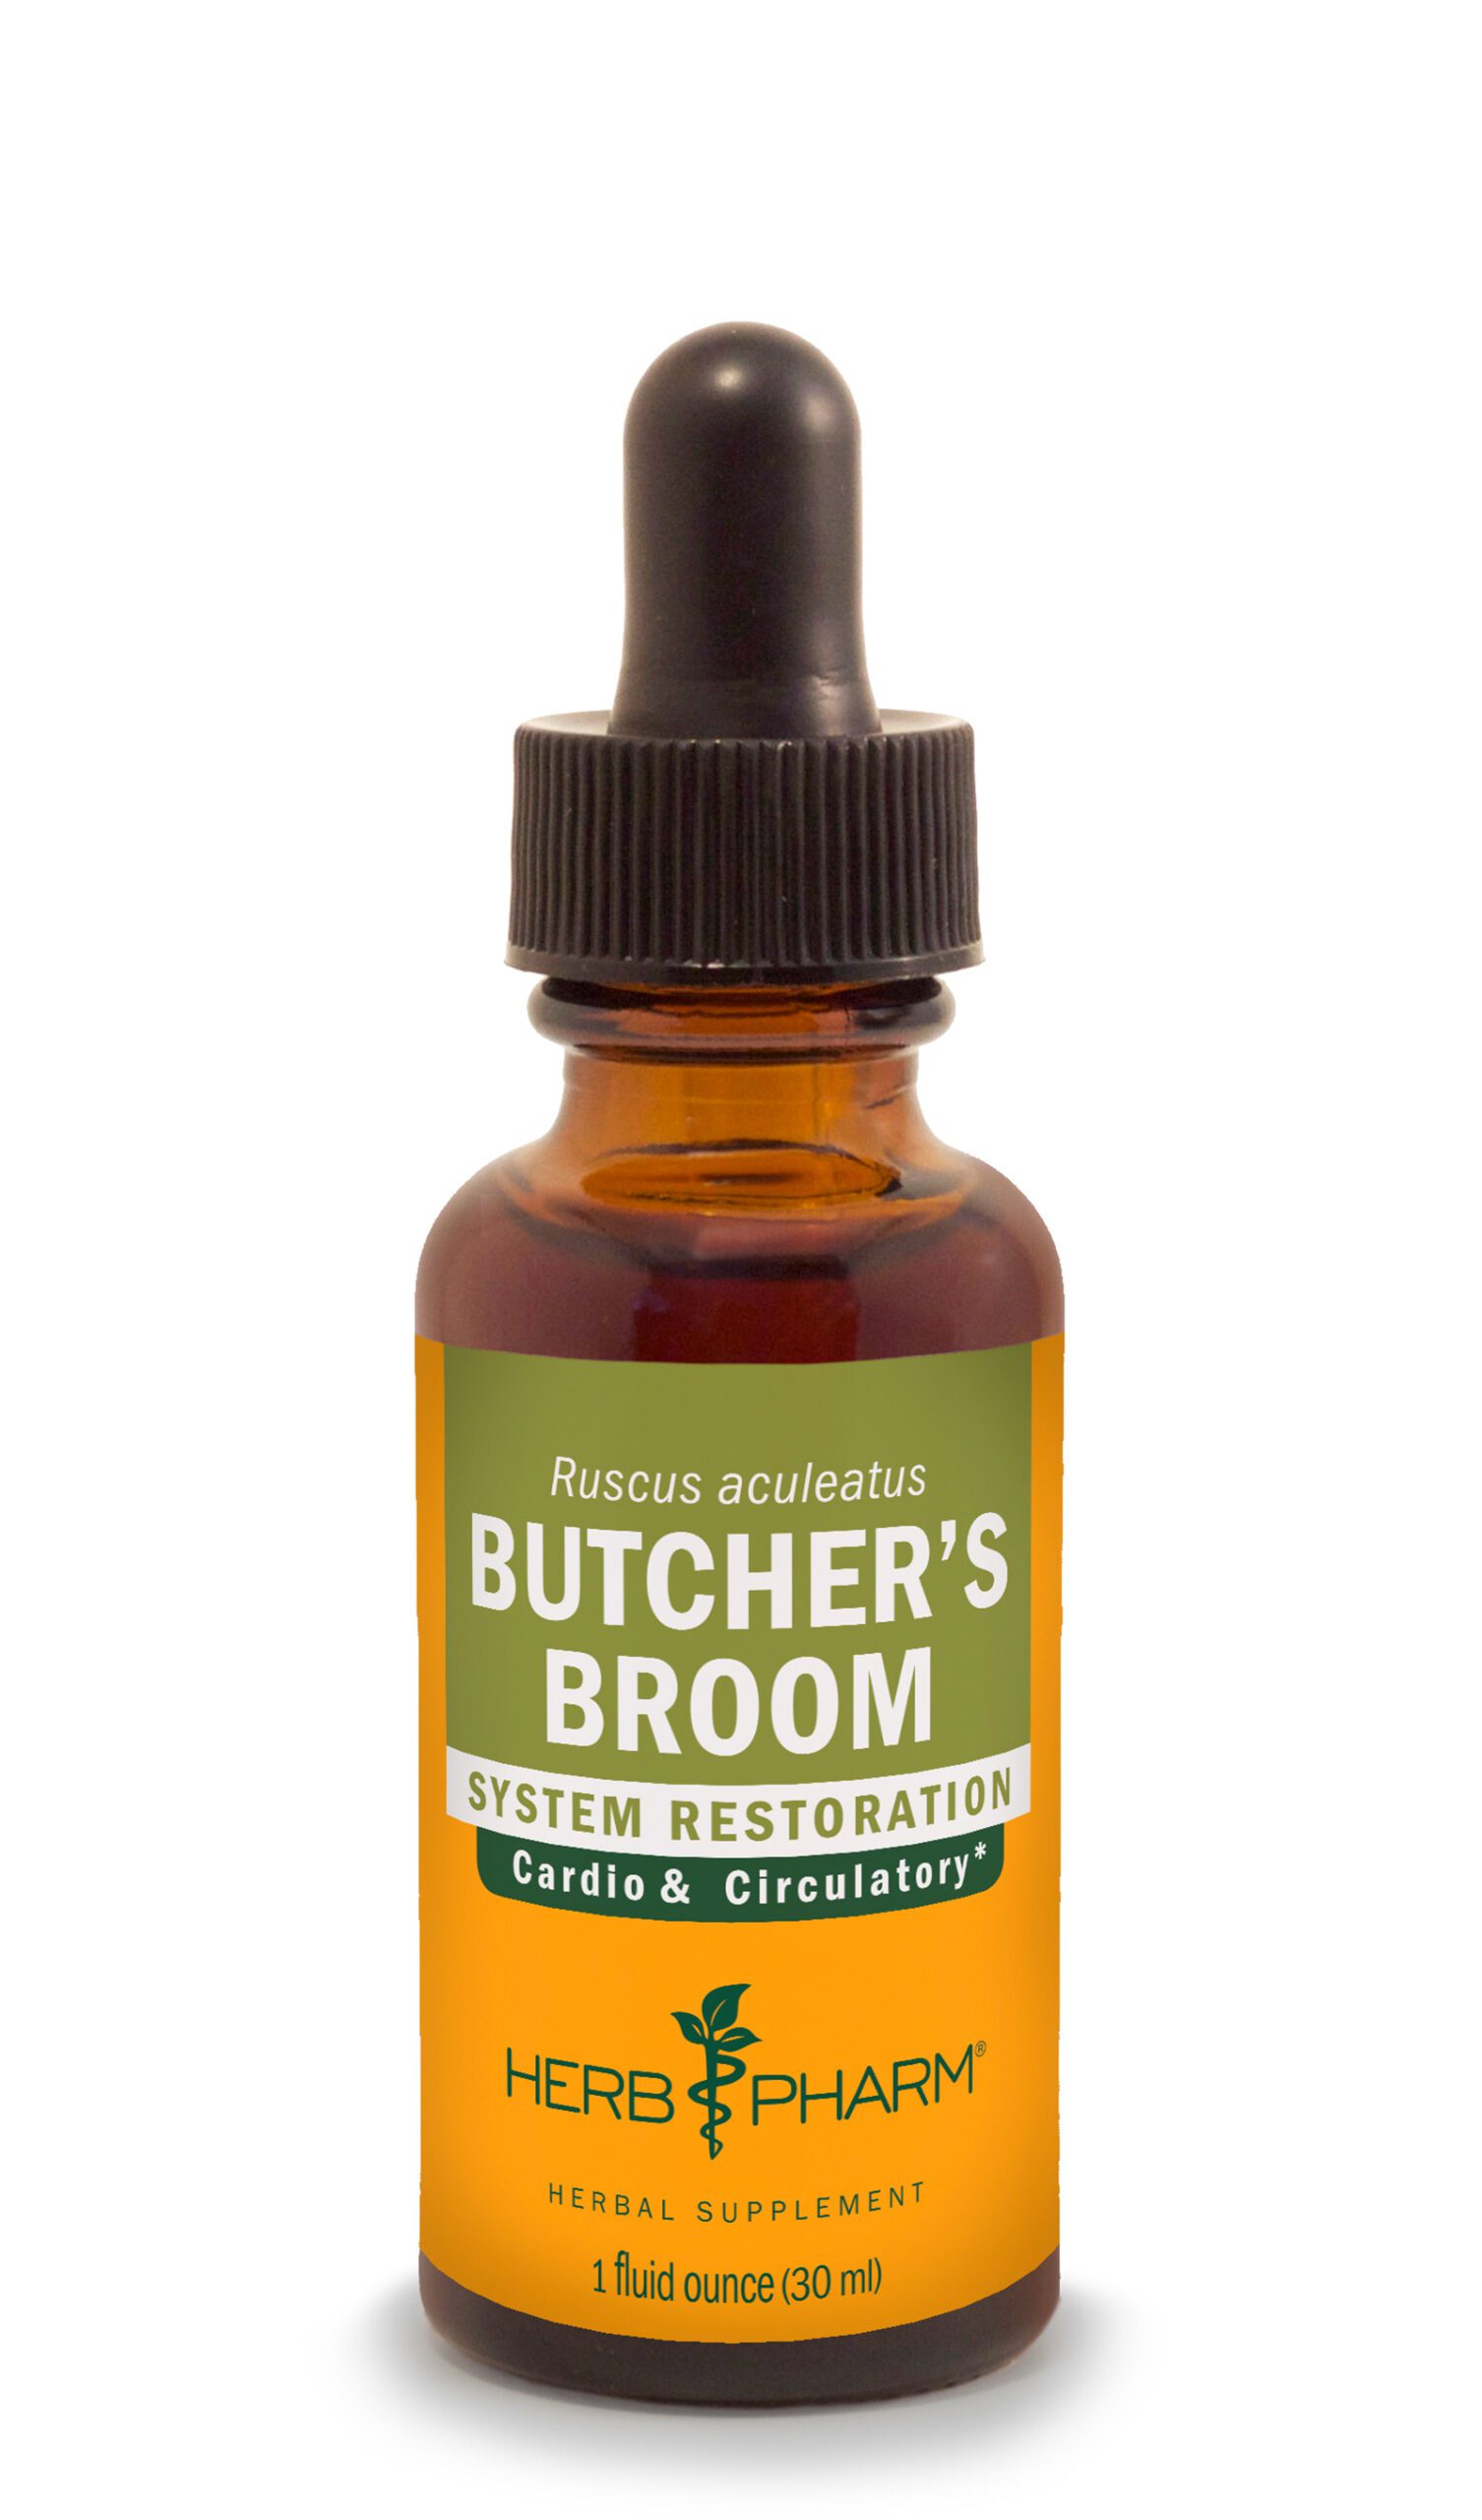 Product Listing Image for Herb Pharm Butcher's Broom Tincture 1oz